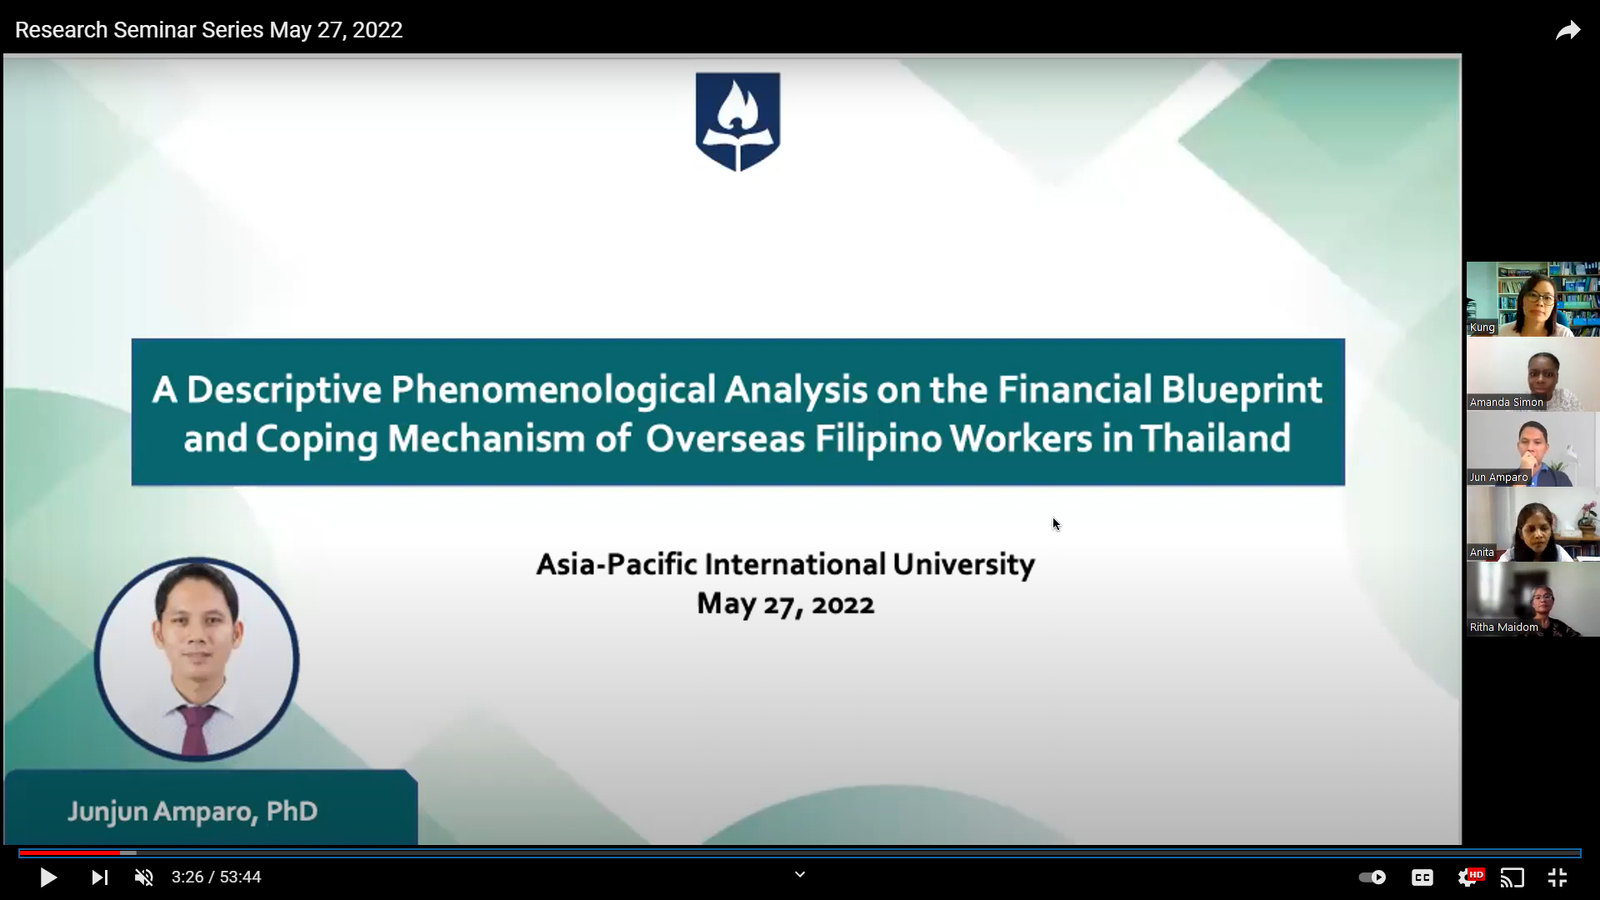 A Descriptive Phenomenological Analysis on the Financial Blueprint and Coping Mechanism of Overseas Filipino Workers in Thailand